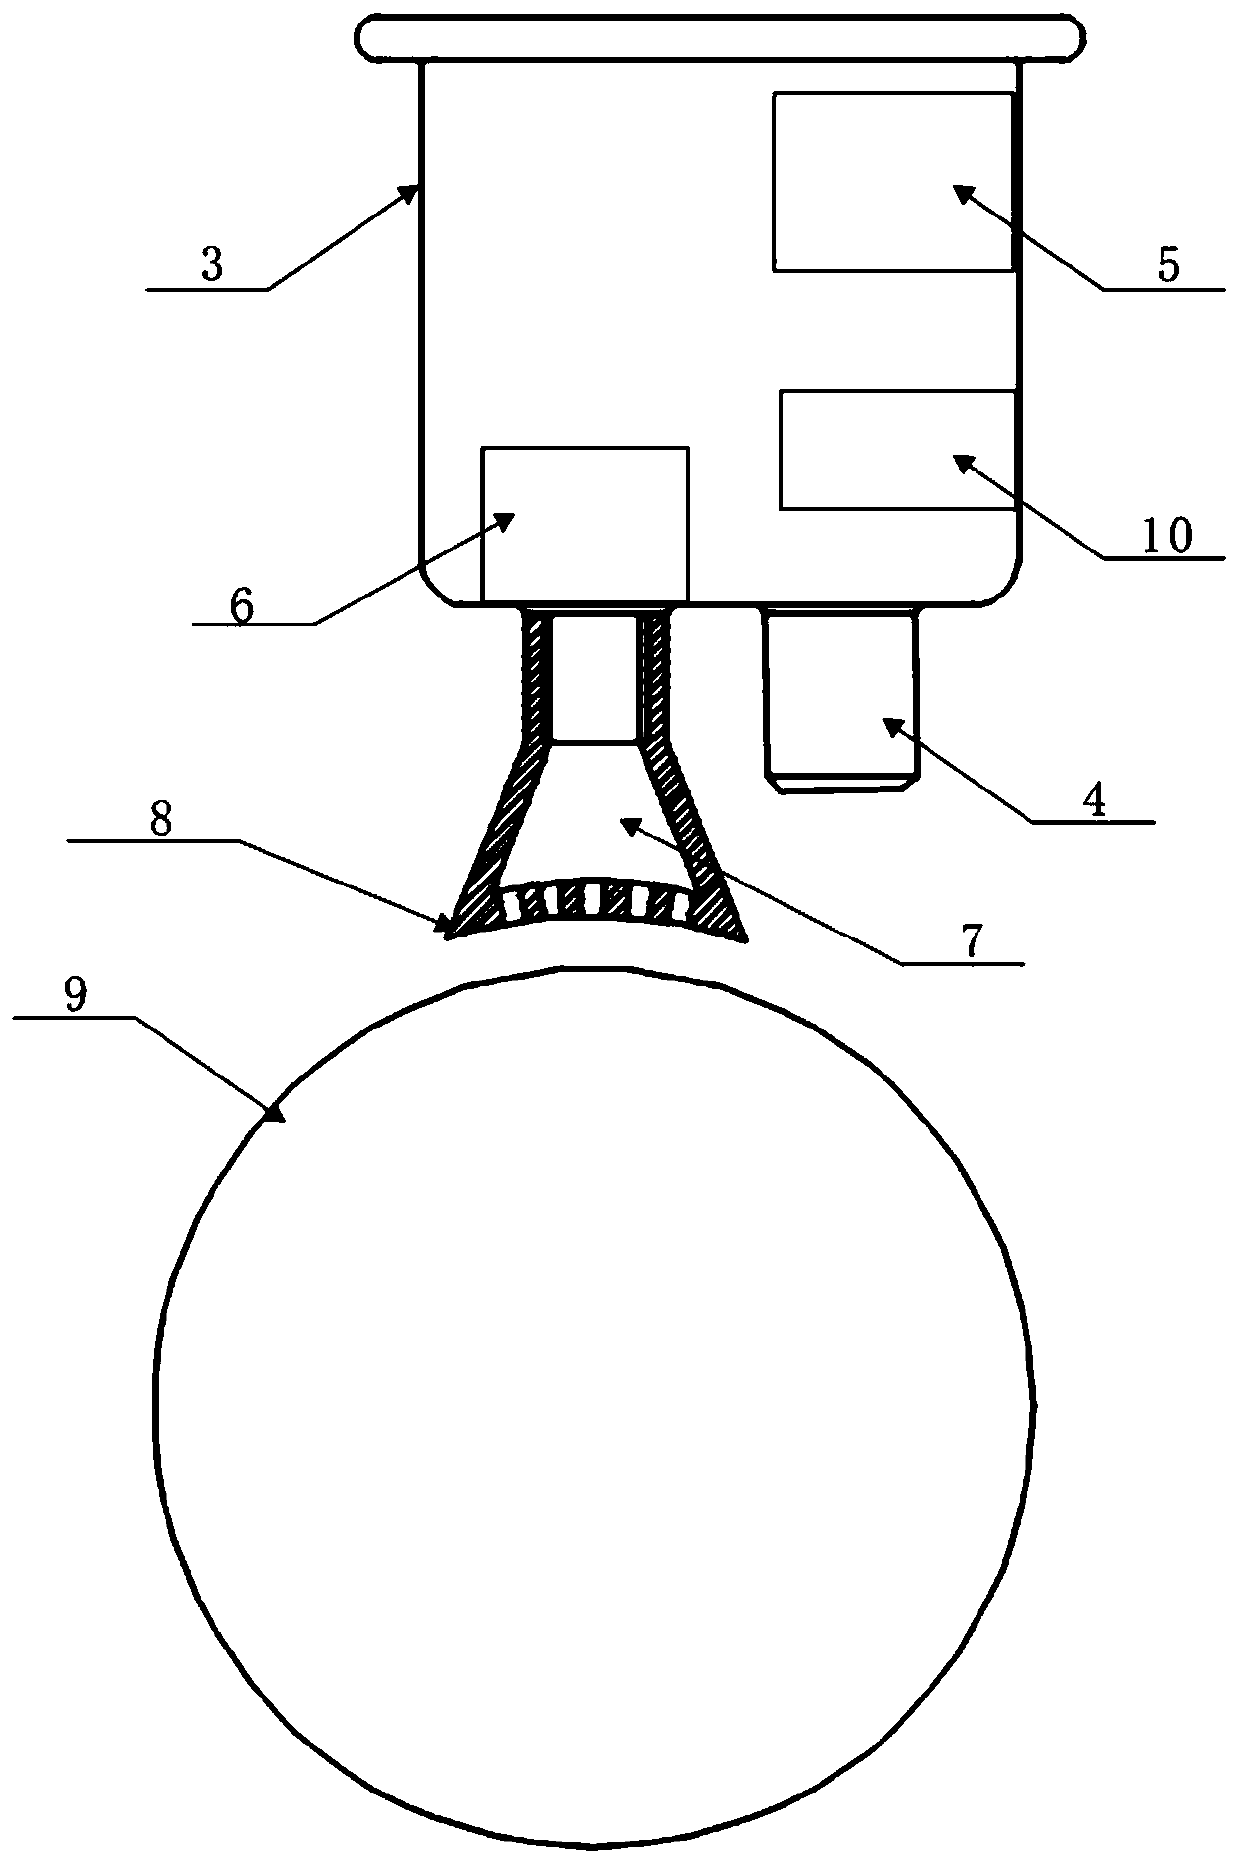 A lubricating device and lubricating method for edge trimming disc shears